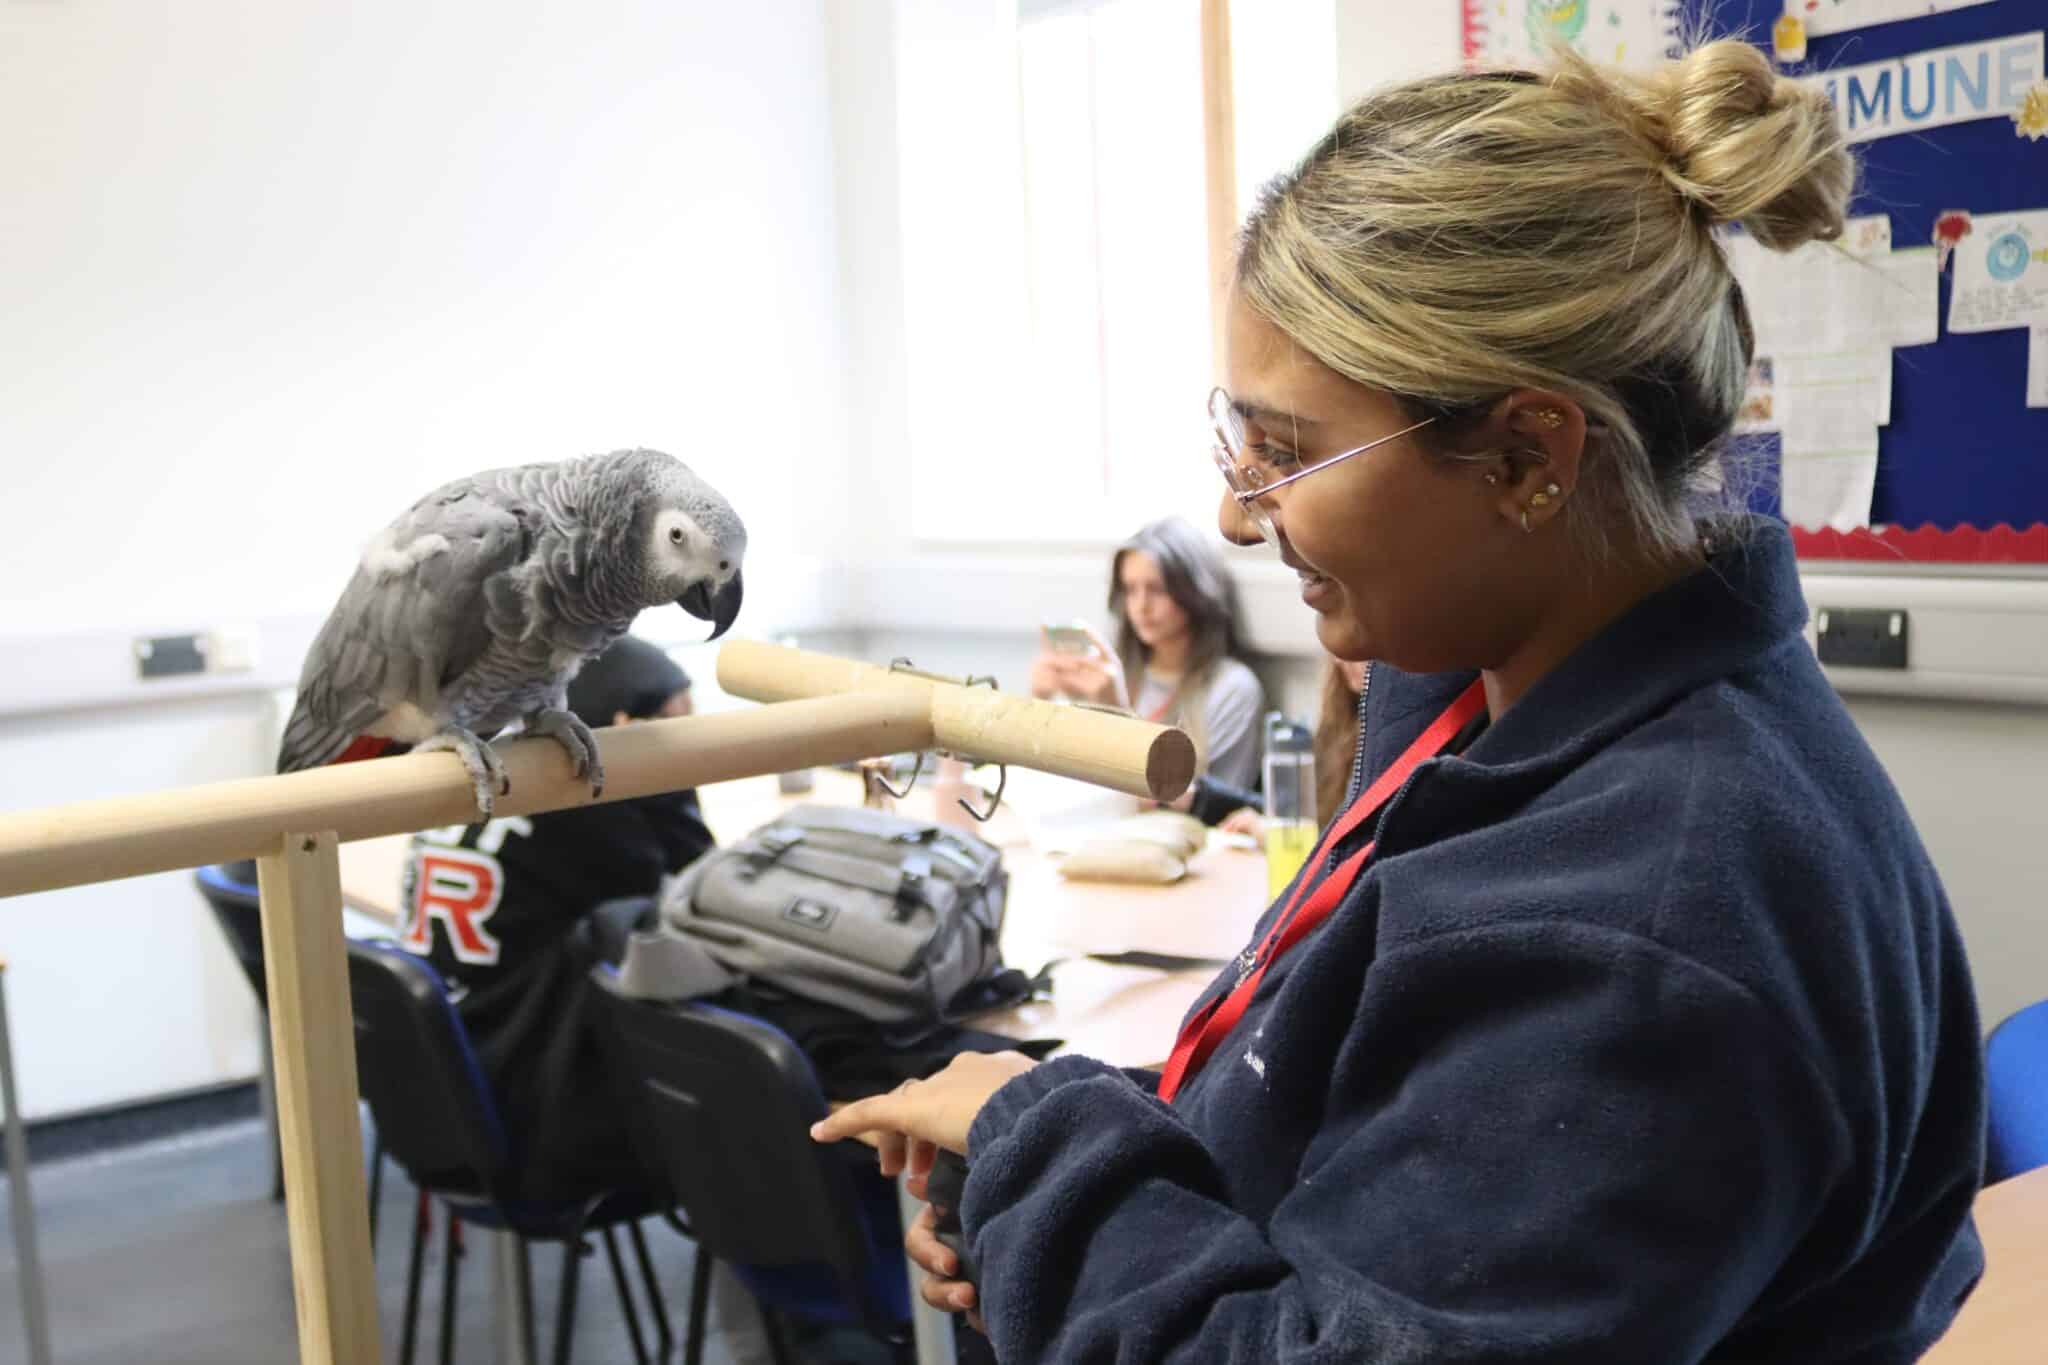 Student Serene feeding Kiwi the parrot who is sitting on her perch in class